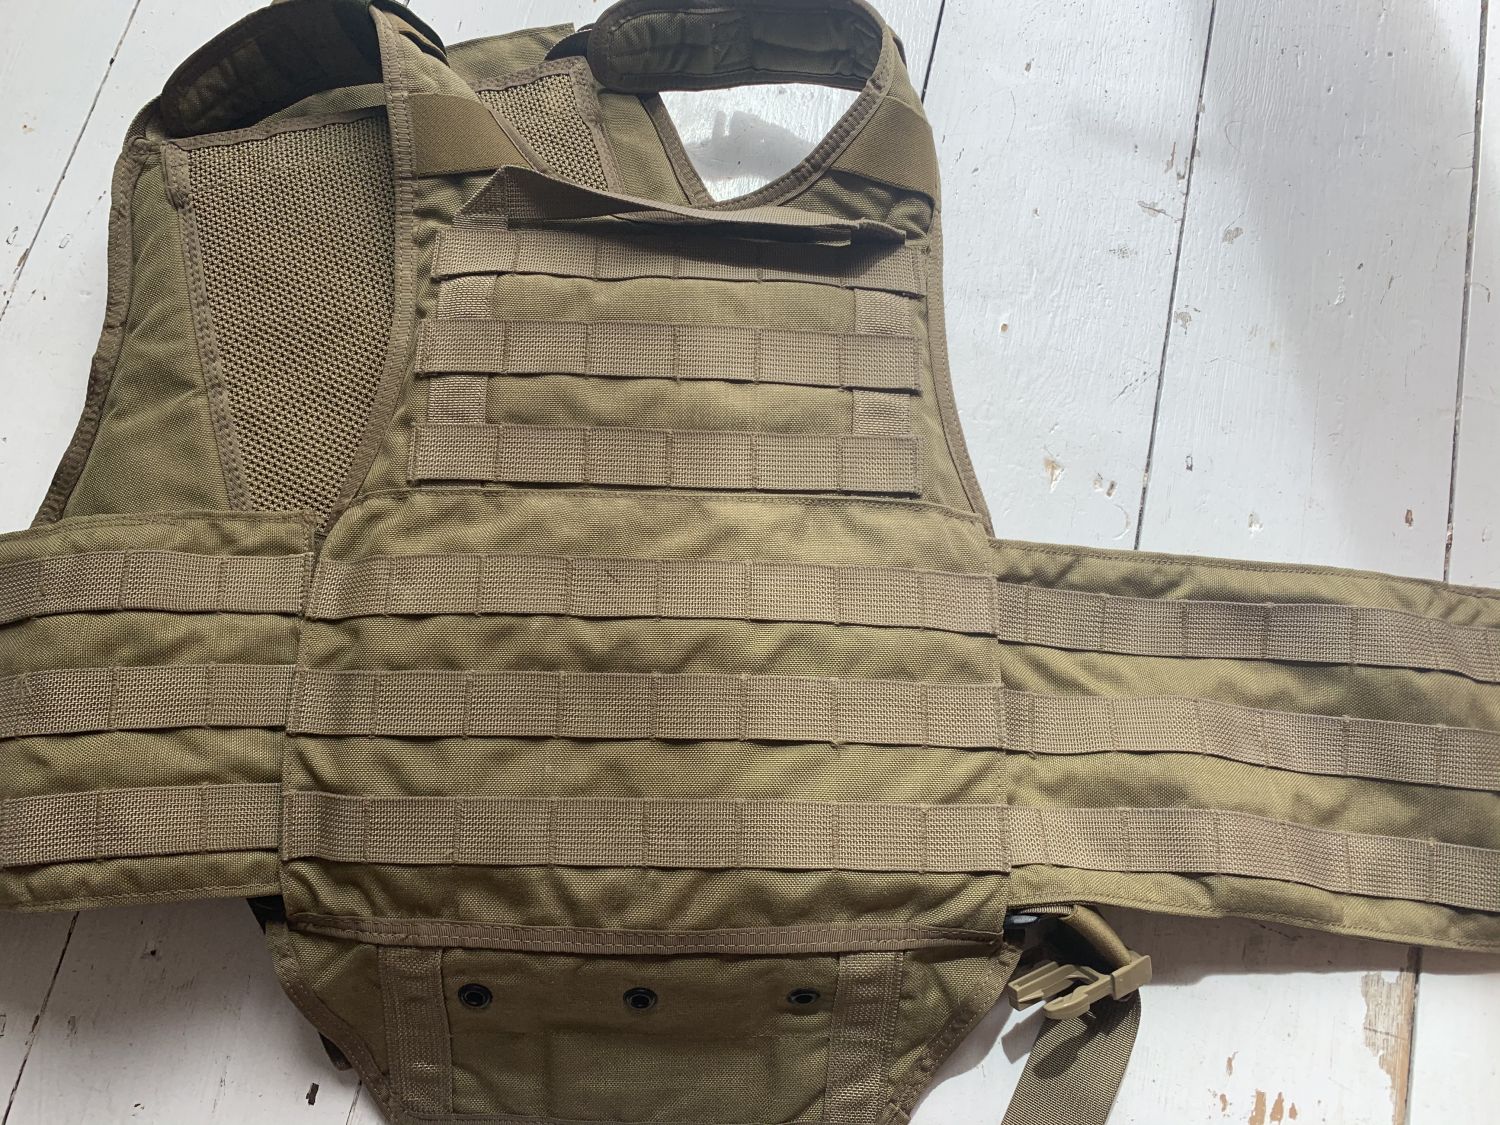 Eagle Industries Plate Carrier S/M - Gear - Airsoft Forums UK